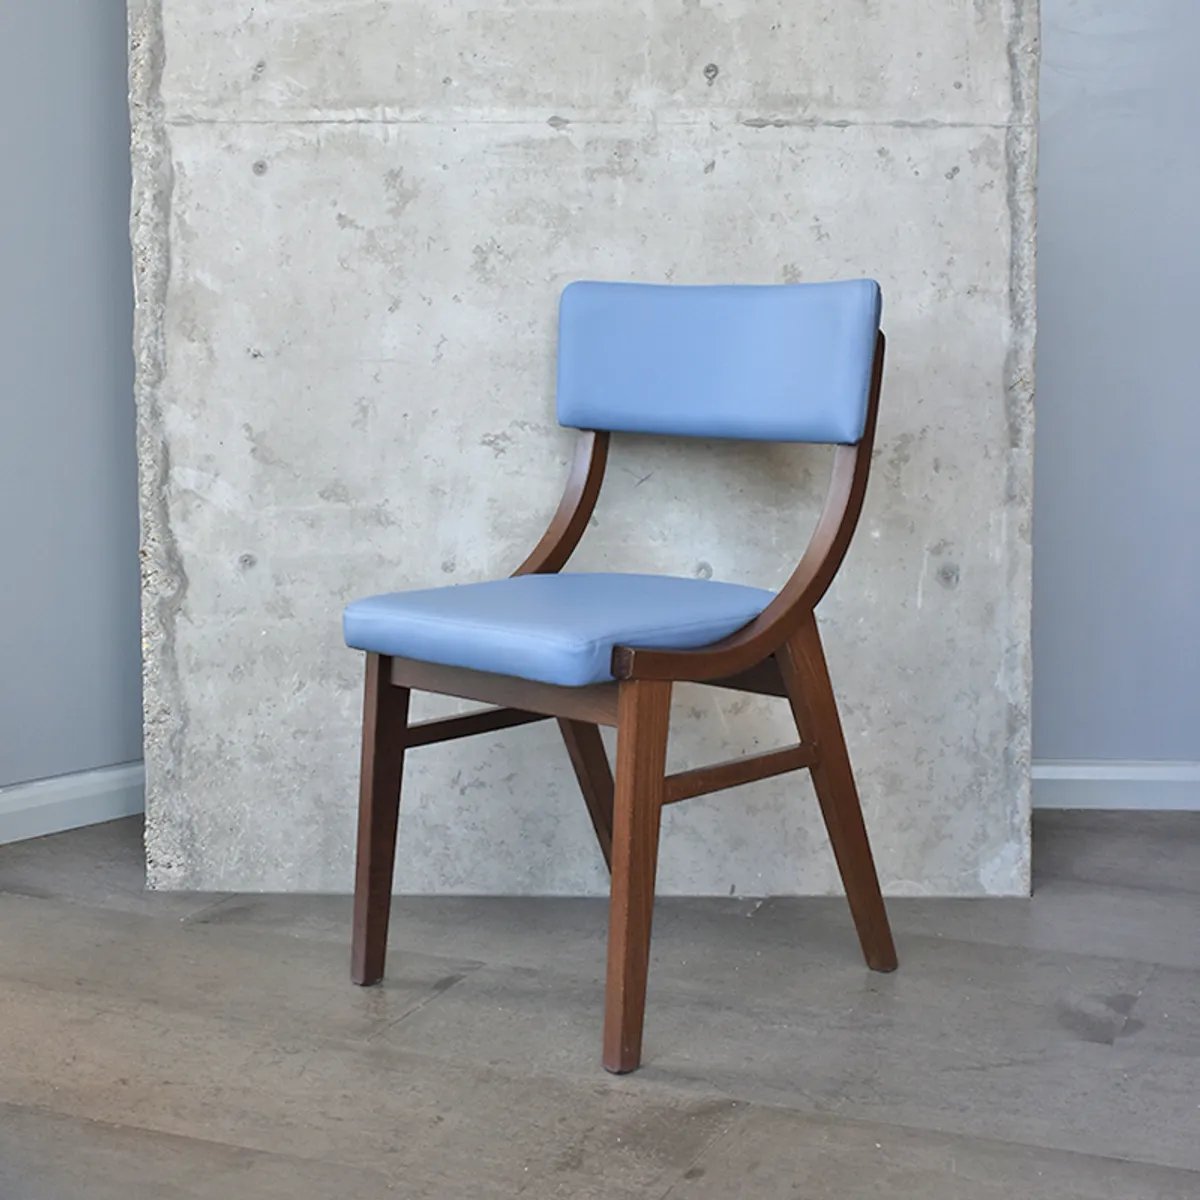 Victoria Chair New Furniture From Milan 2019 By Inside Out Contracts 040